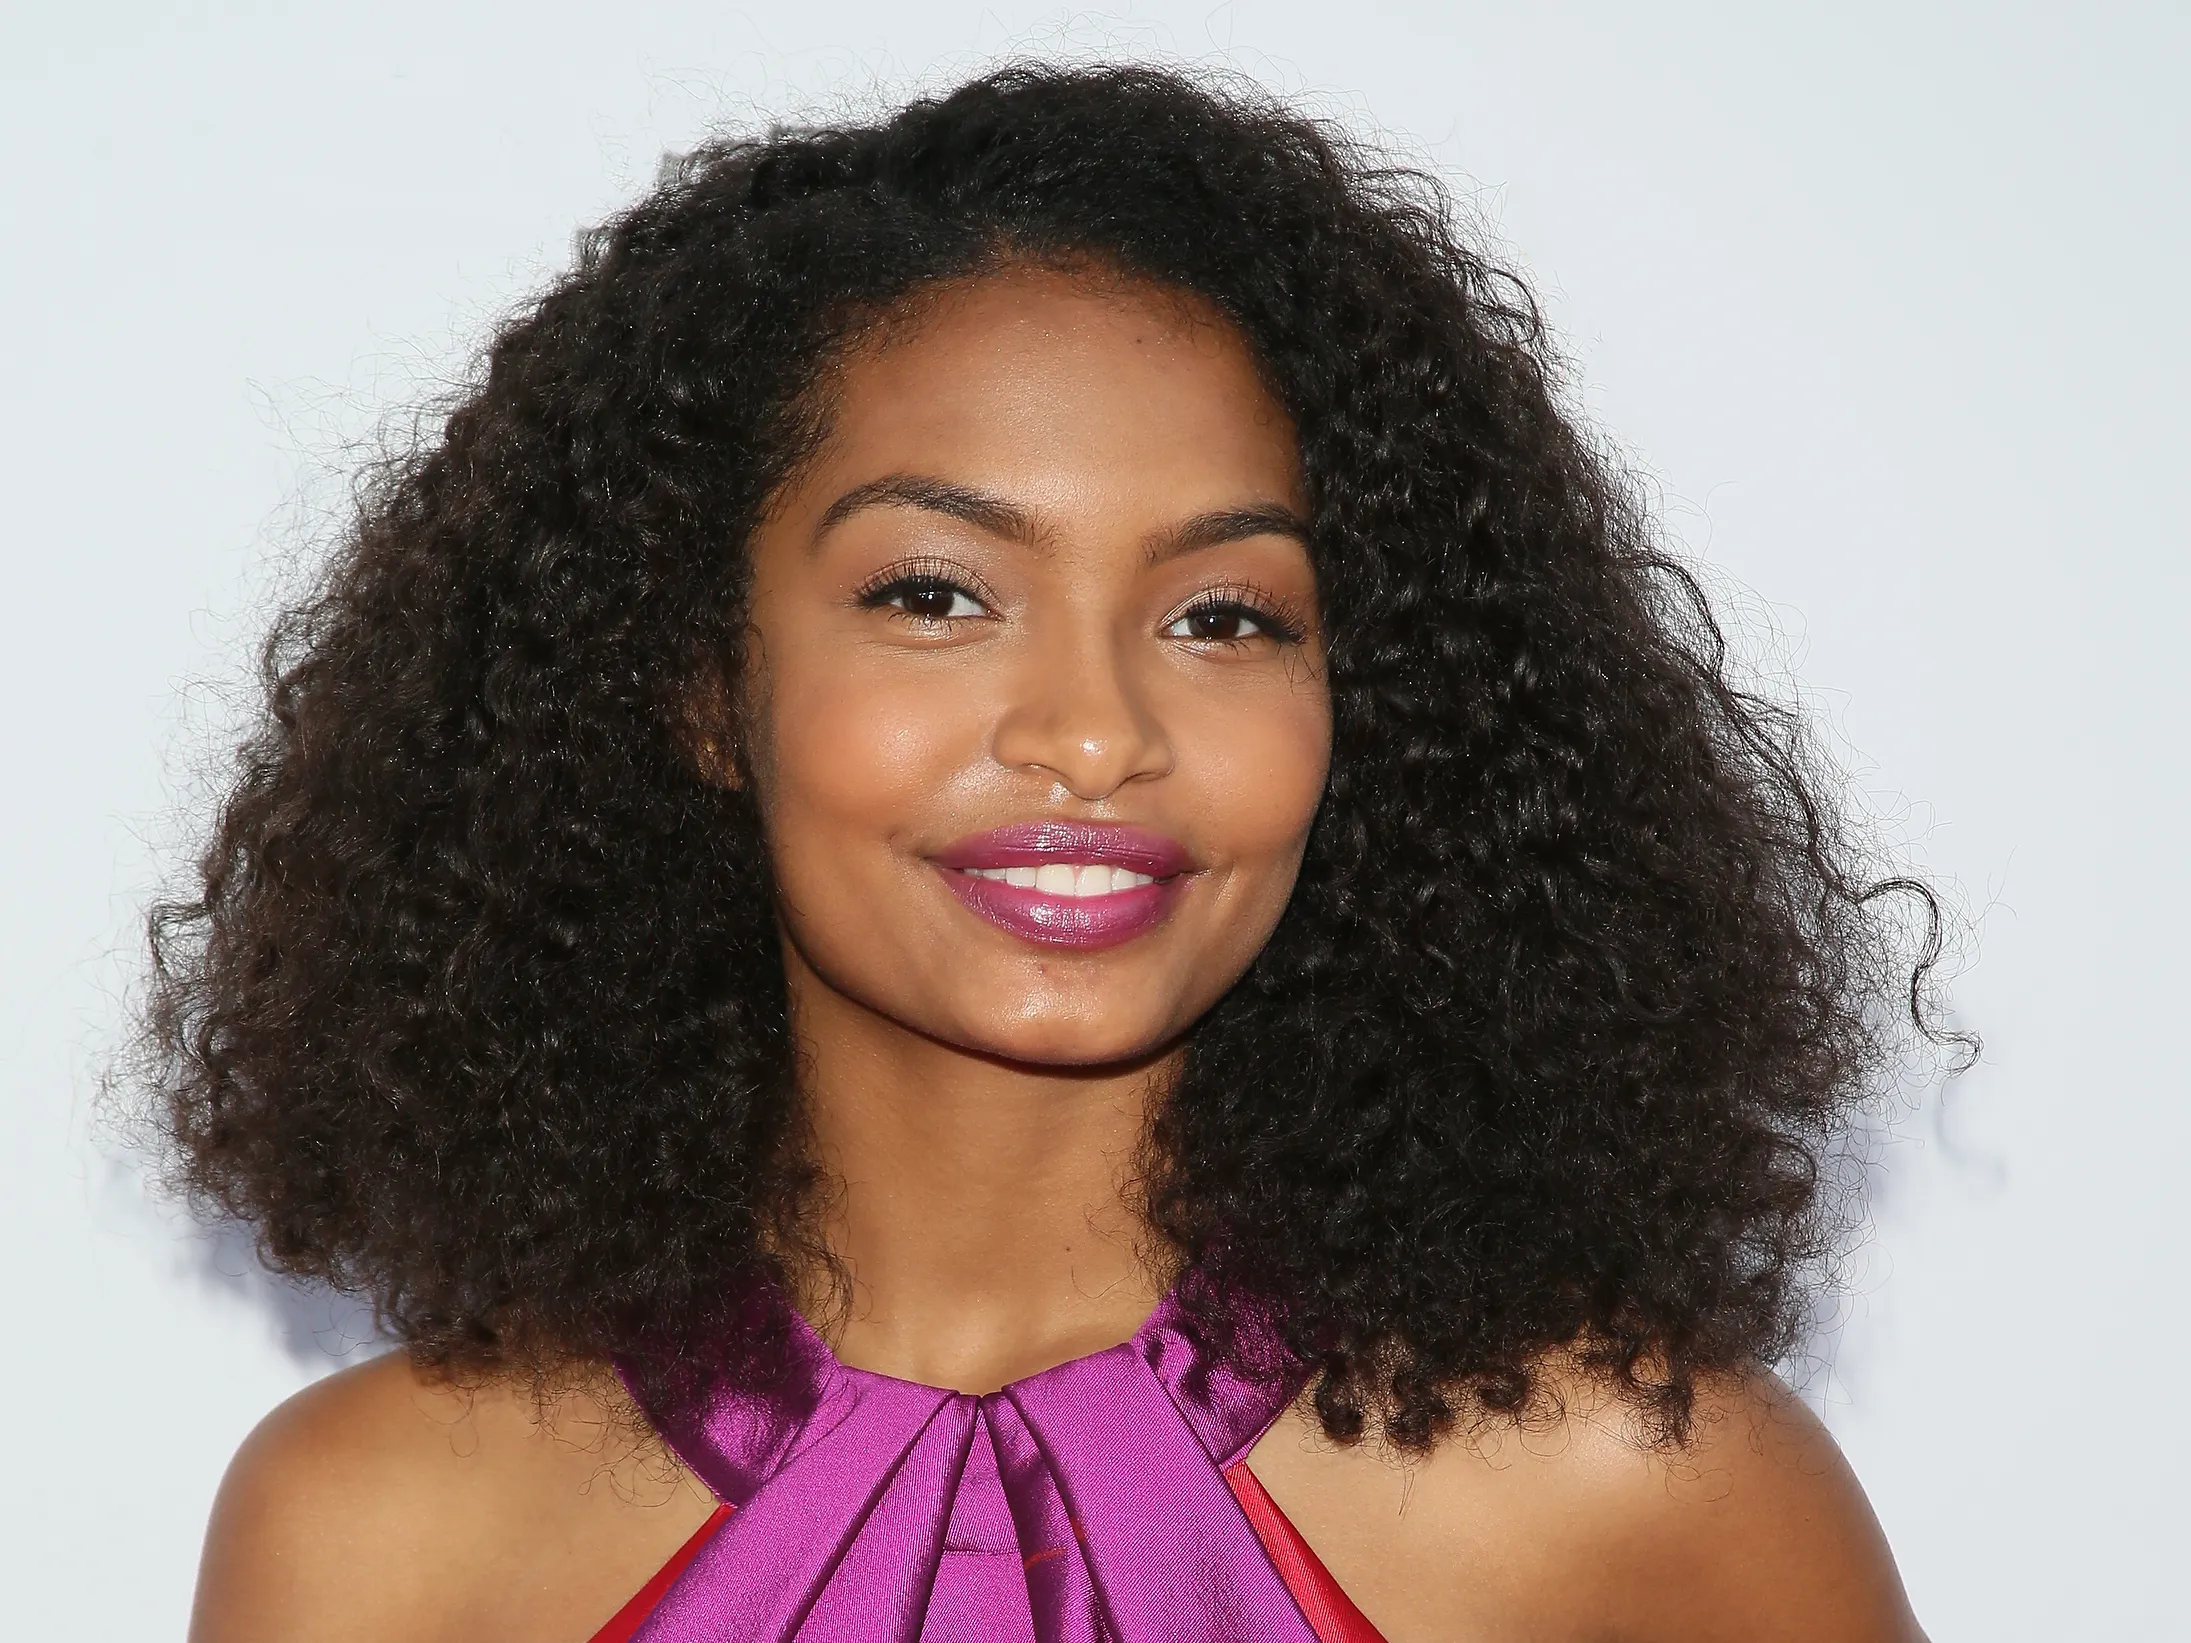 Who Is Yara Shahidi Dating? Complete Details